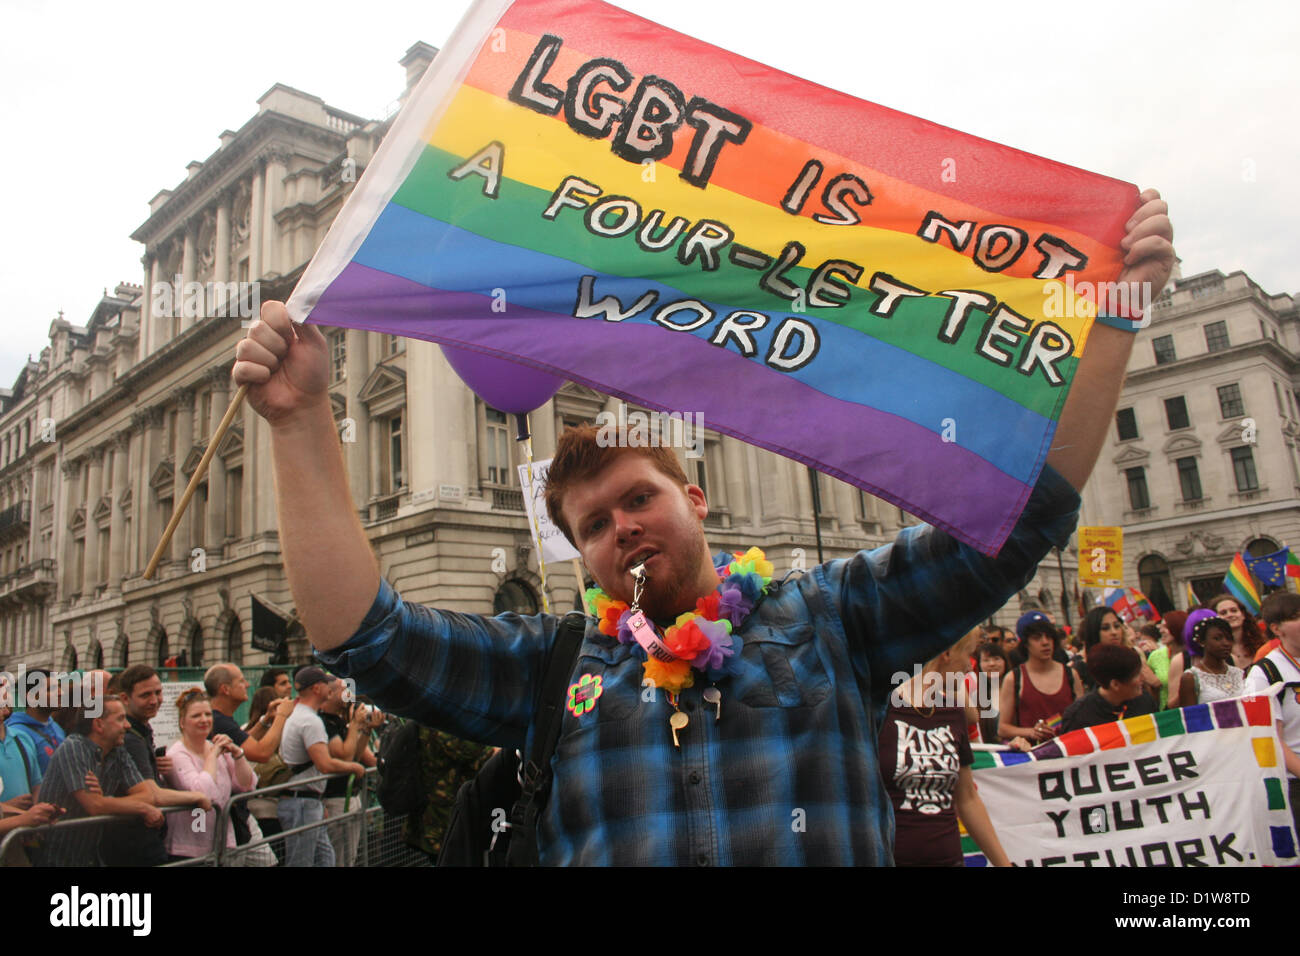 Activist with a rainbow flag at Pride London parade Stock Photo